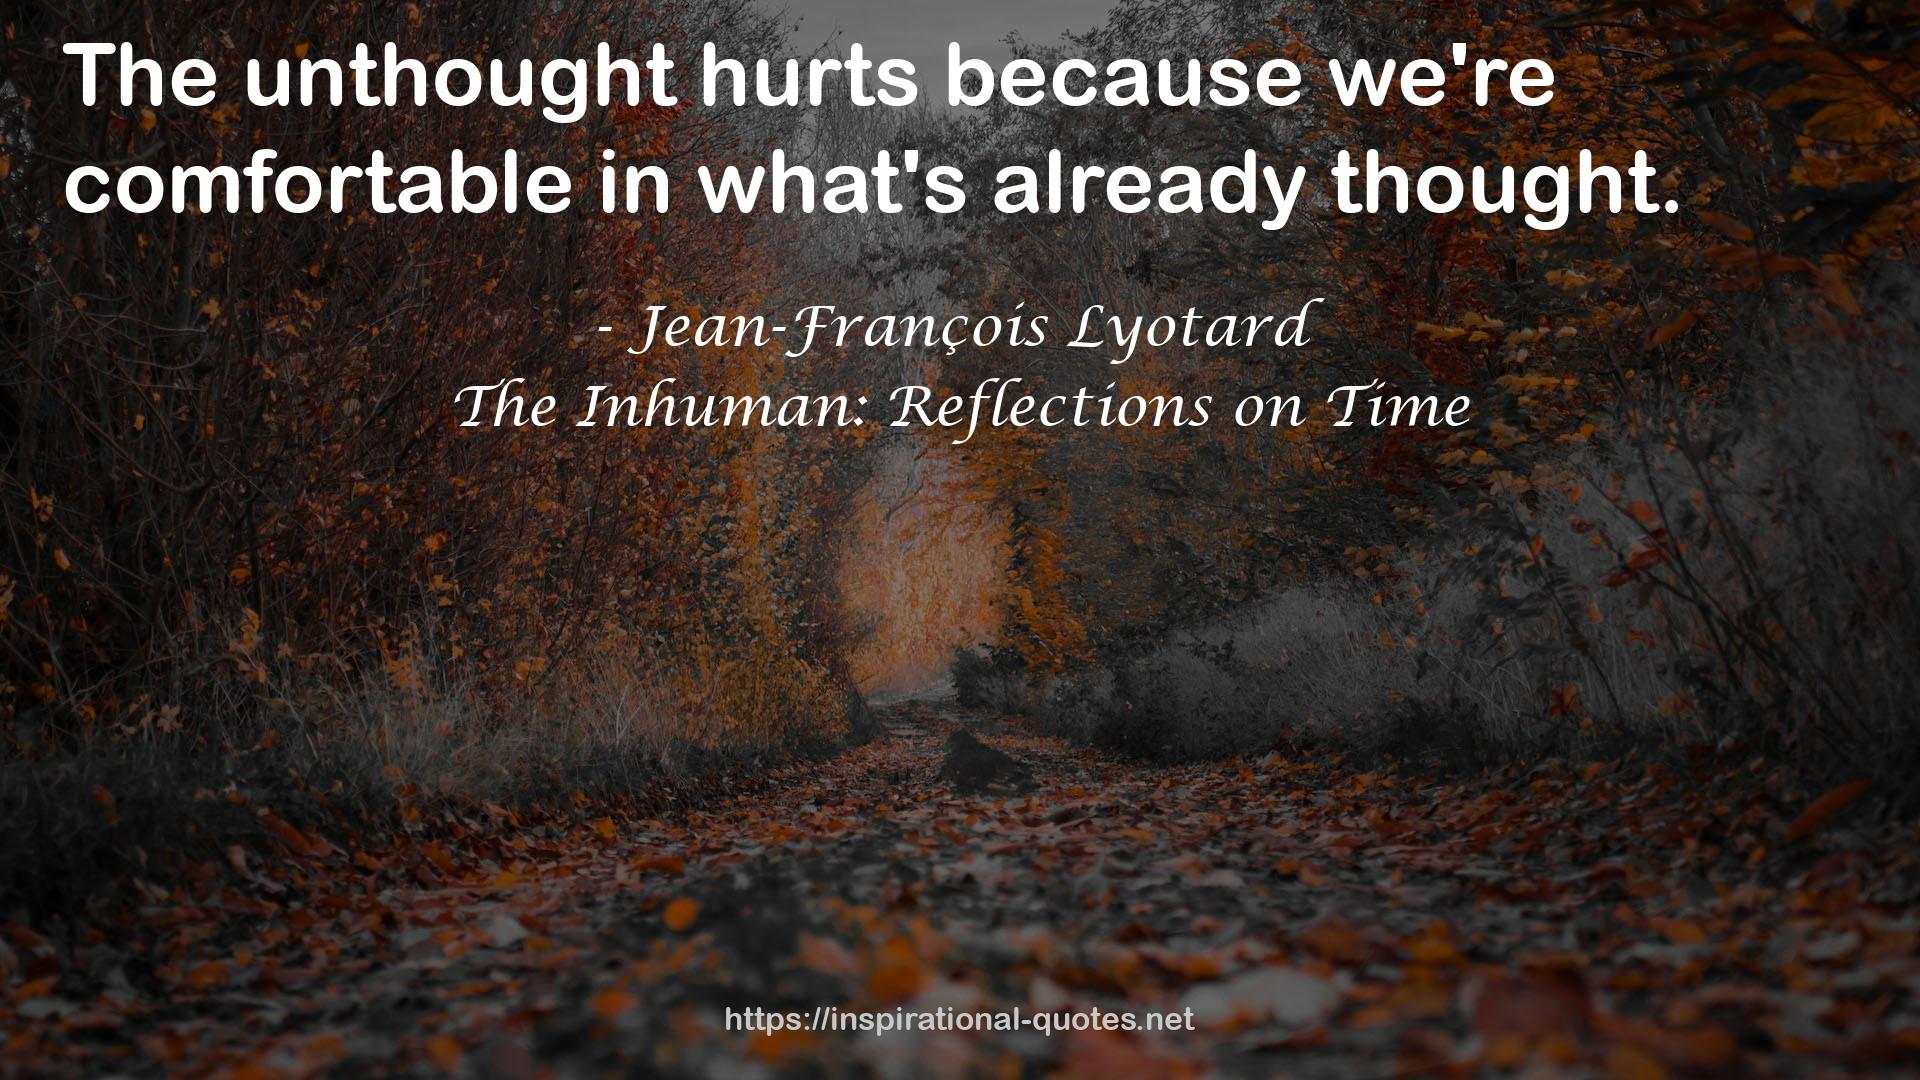 The Inhuman: Reflections on Time QUOTES